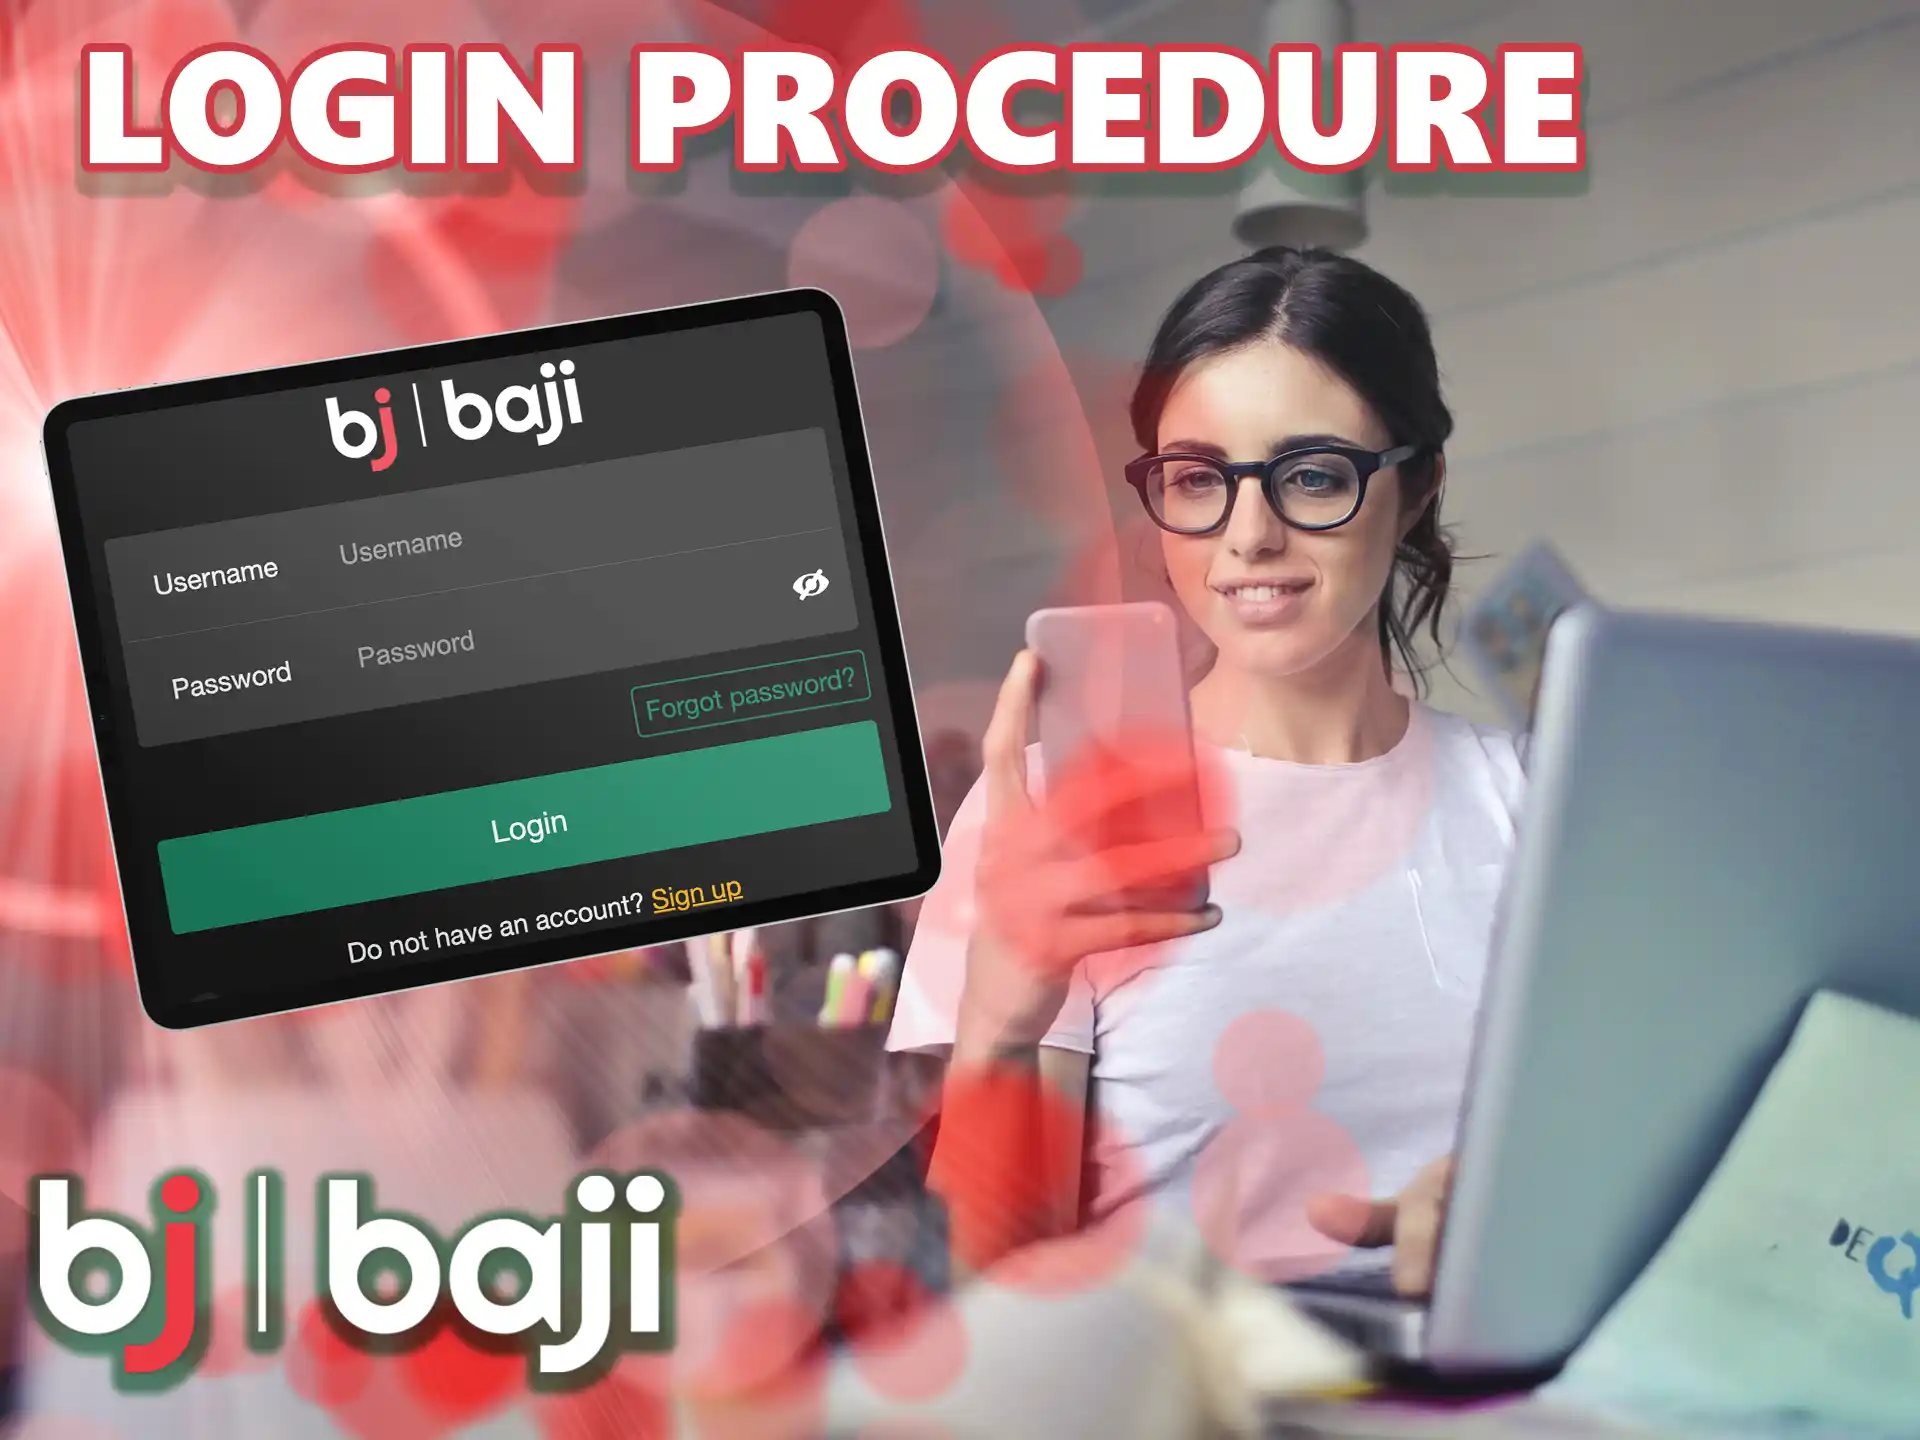 In order to bet effectively, you need to go through a fairly uncomplicated authorization process on the Baji app.